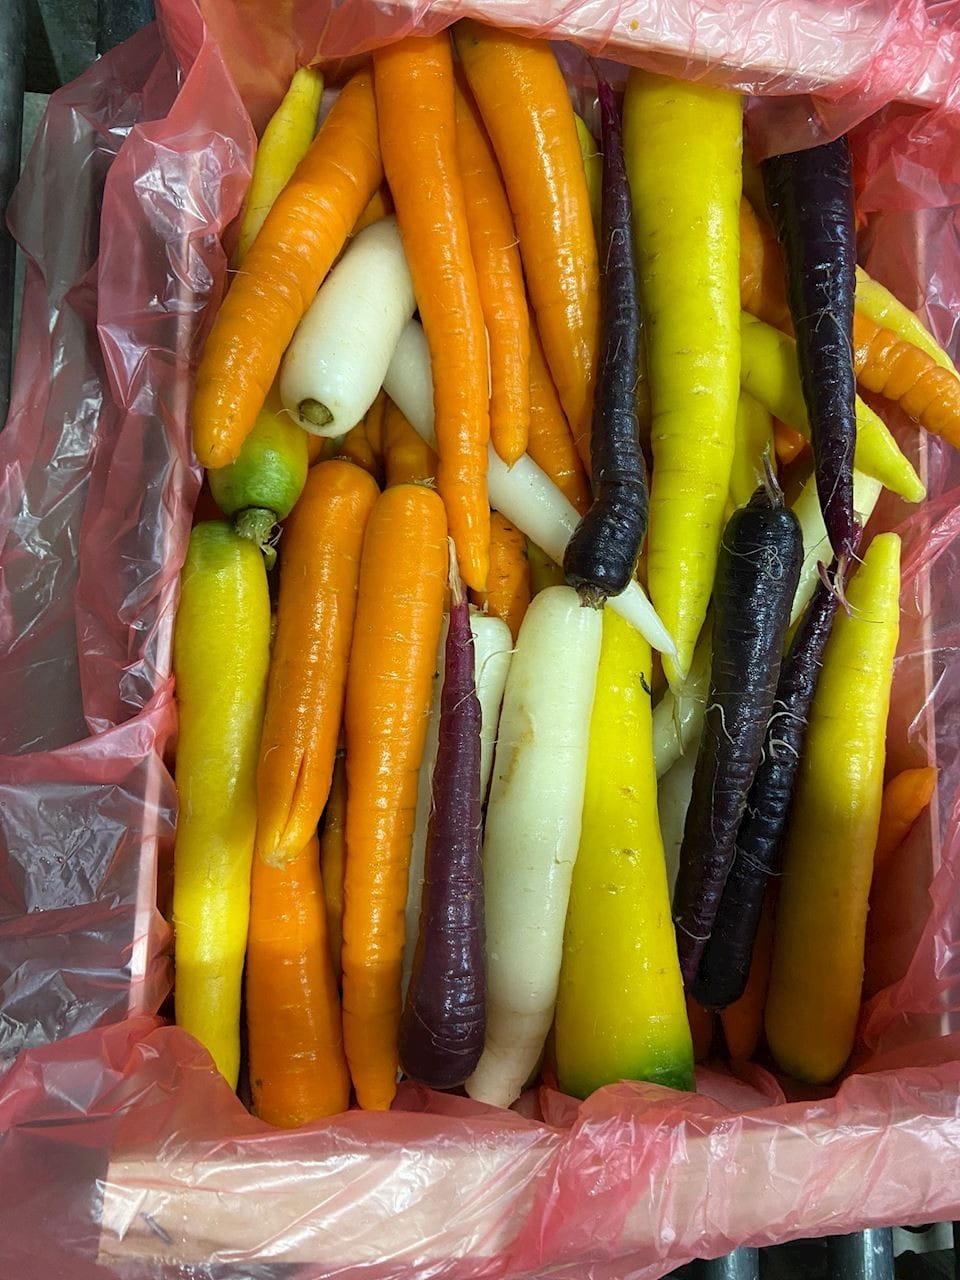 MULTIPACK (kg) - COLORFUL CARROTS YOUNG FRESH ORGANIC (approx. 6 kg)